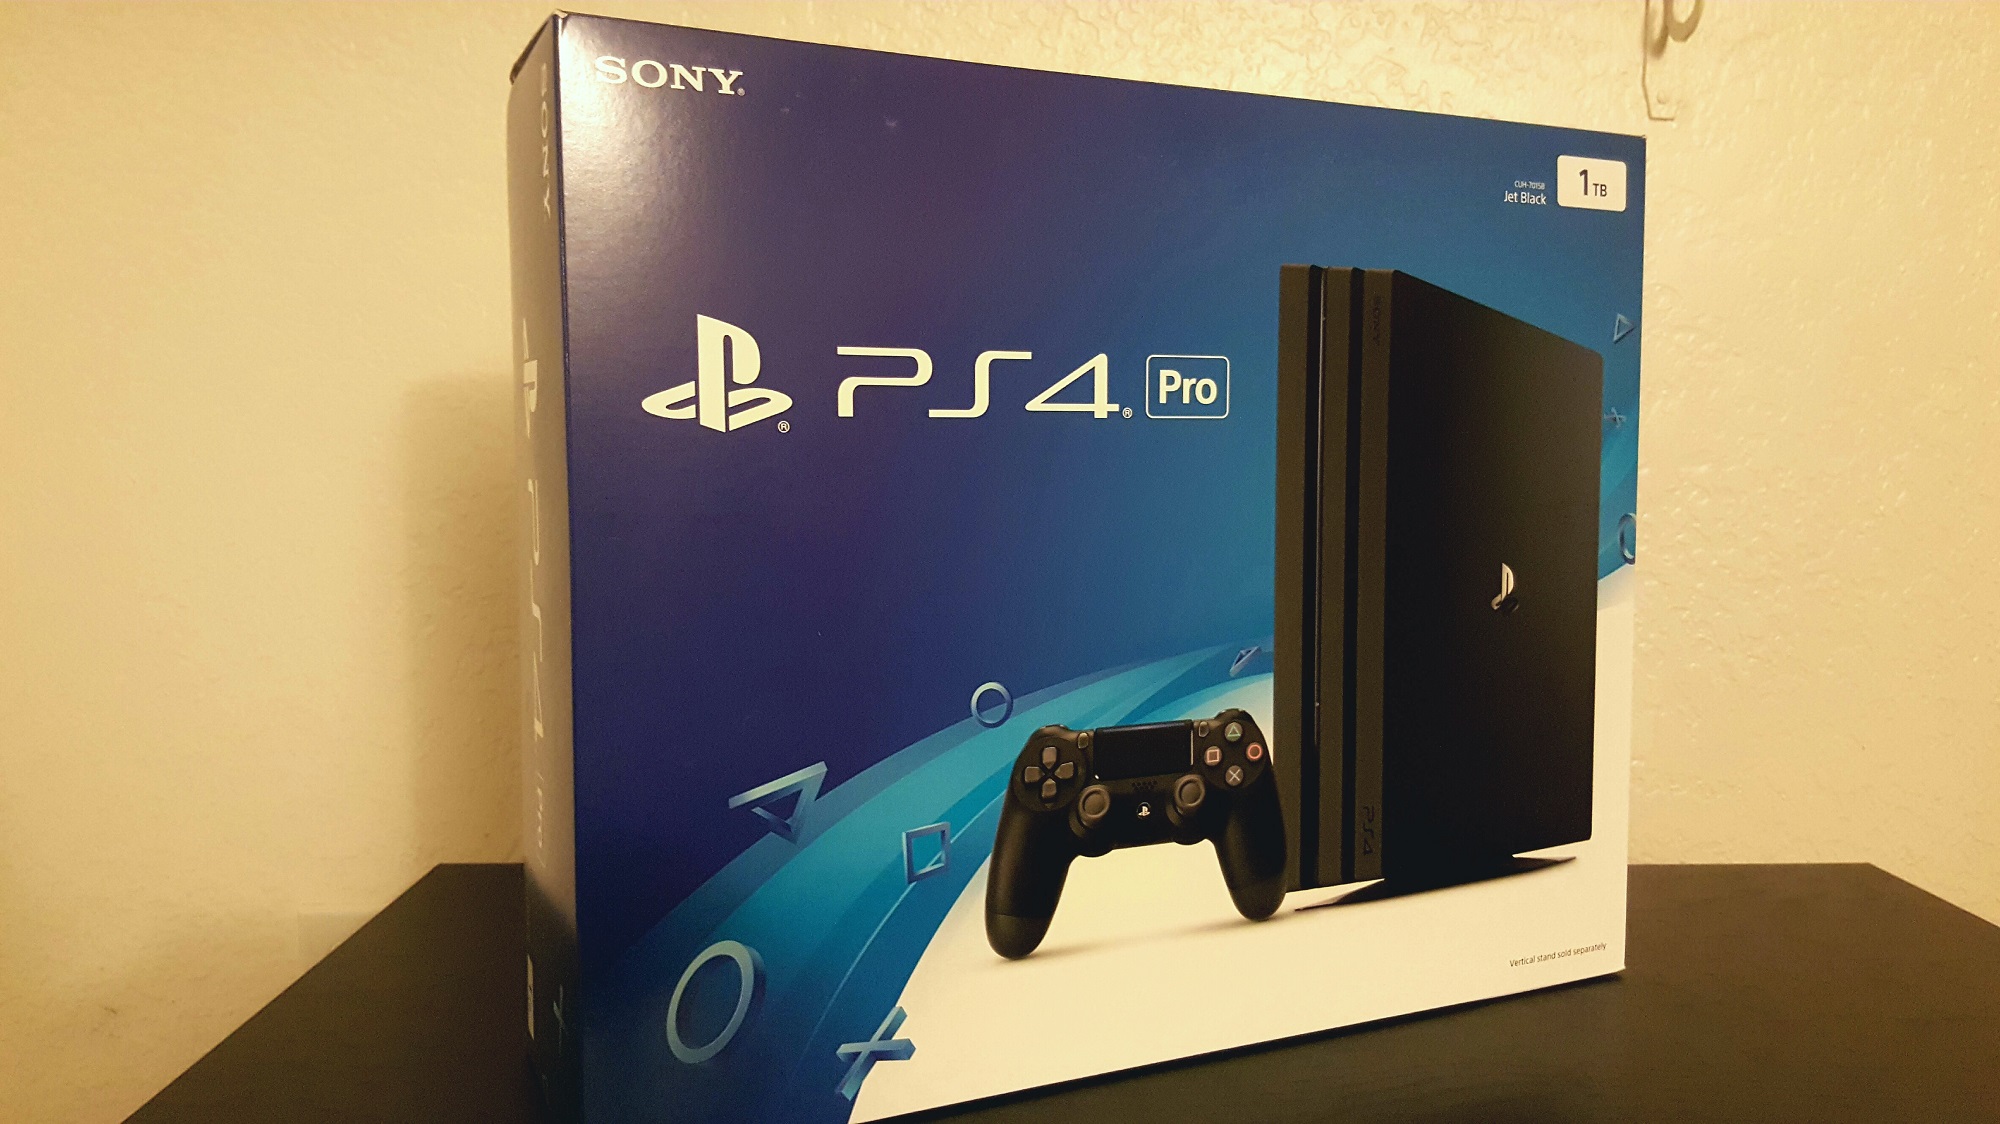 PlayStation 4: Unboxing the PS4 [Photos]